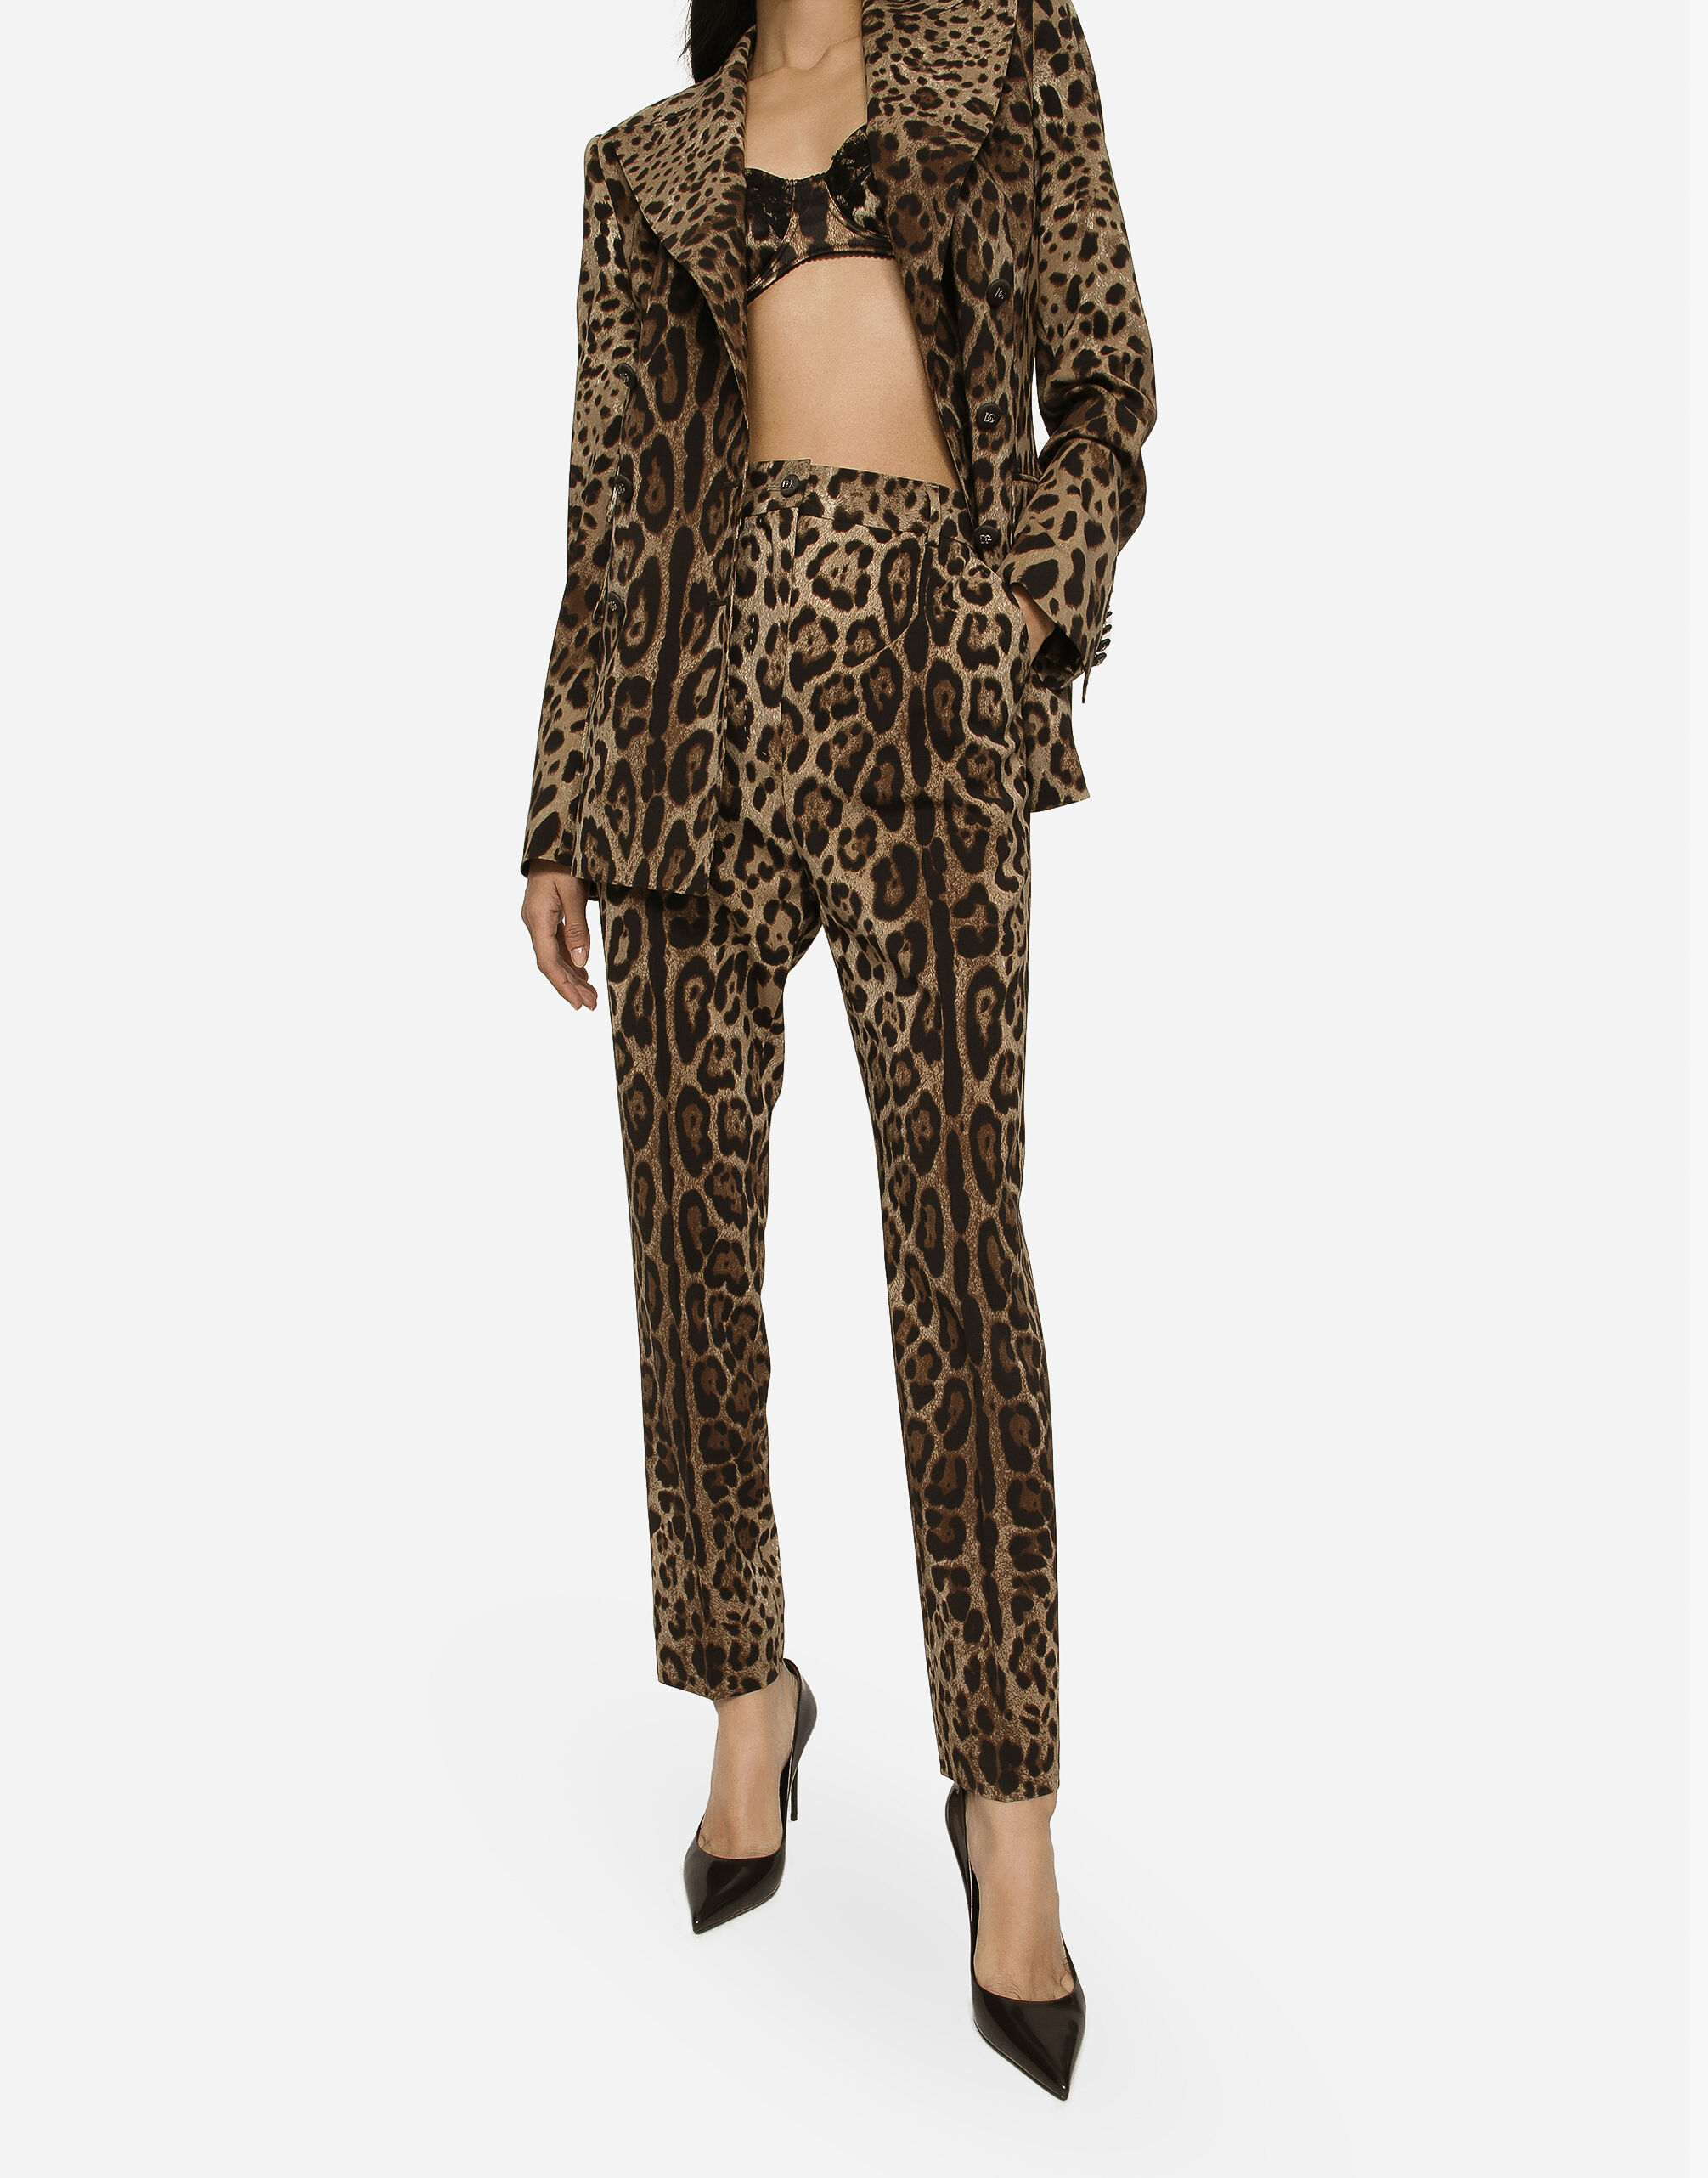 ASOS DESIGN pull on trouser with contrast panel in leopard | ASOS